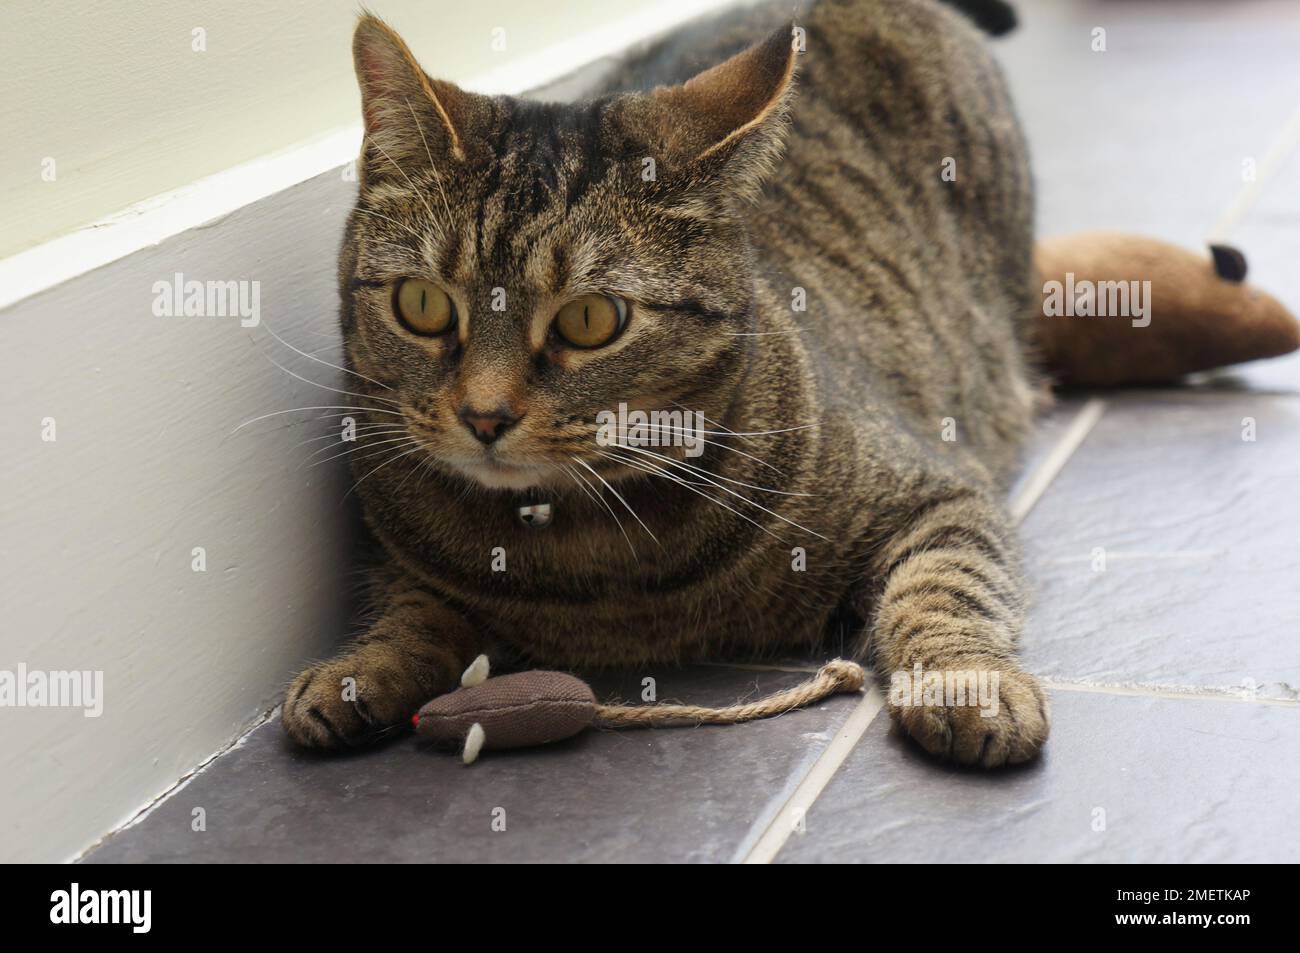 Tabby cat playing with toy mouse Stock Photo